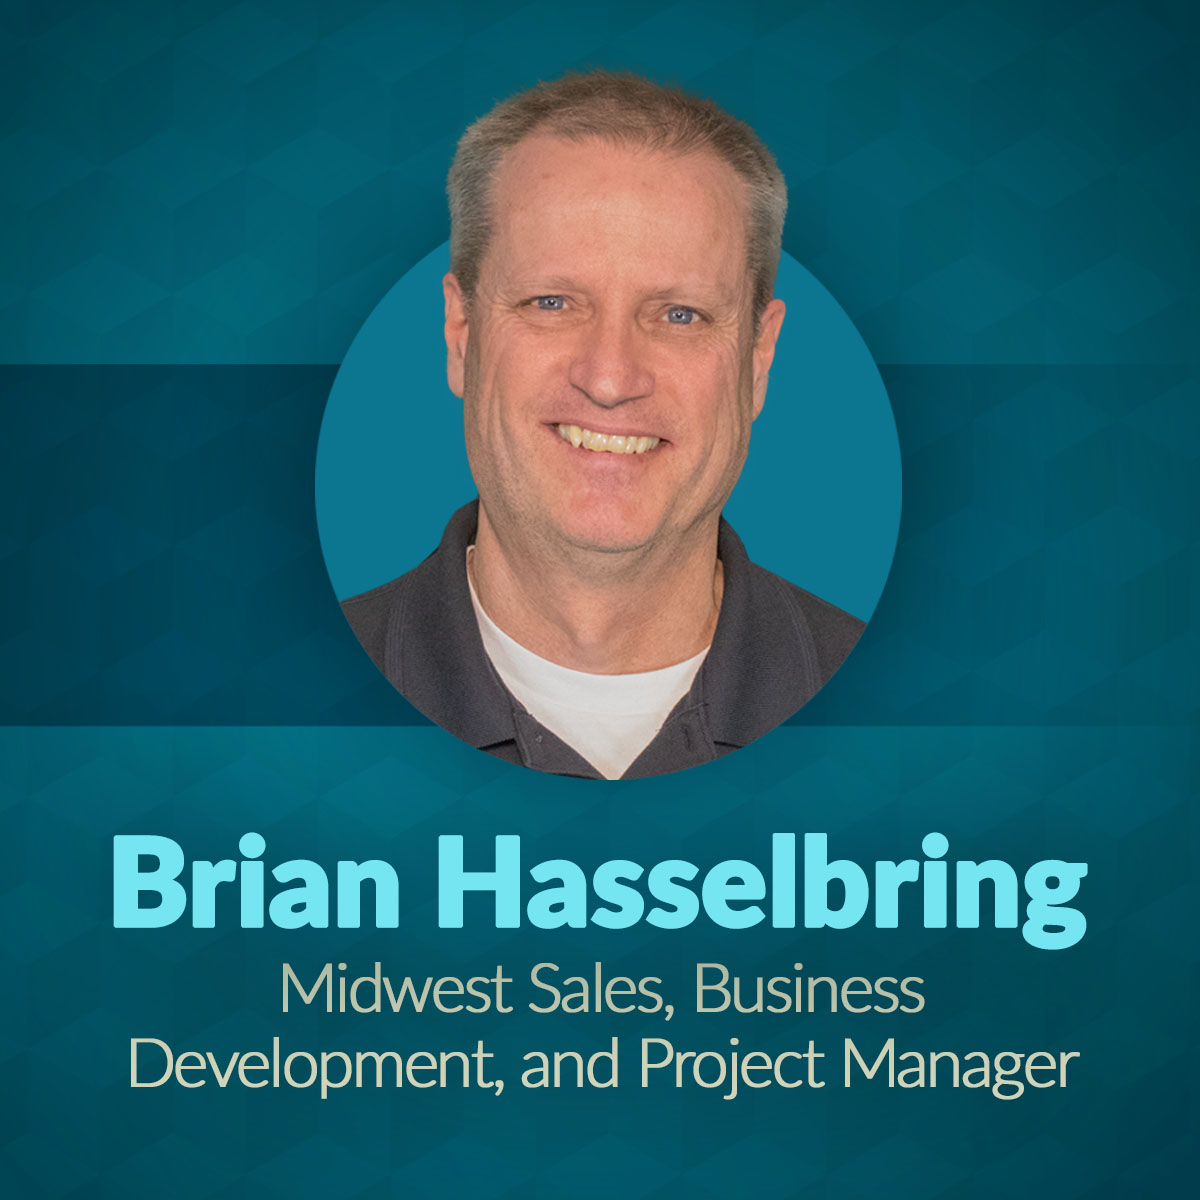 Get to Know Brian Hasselbring